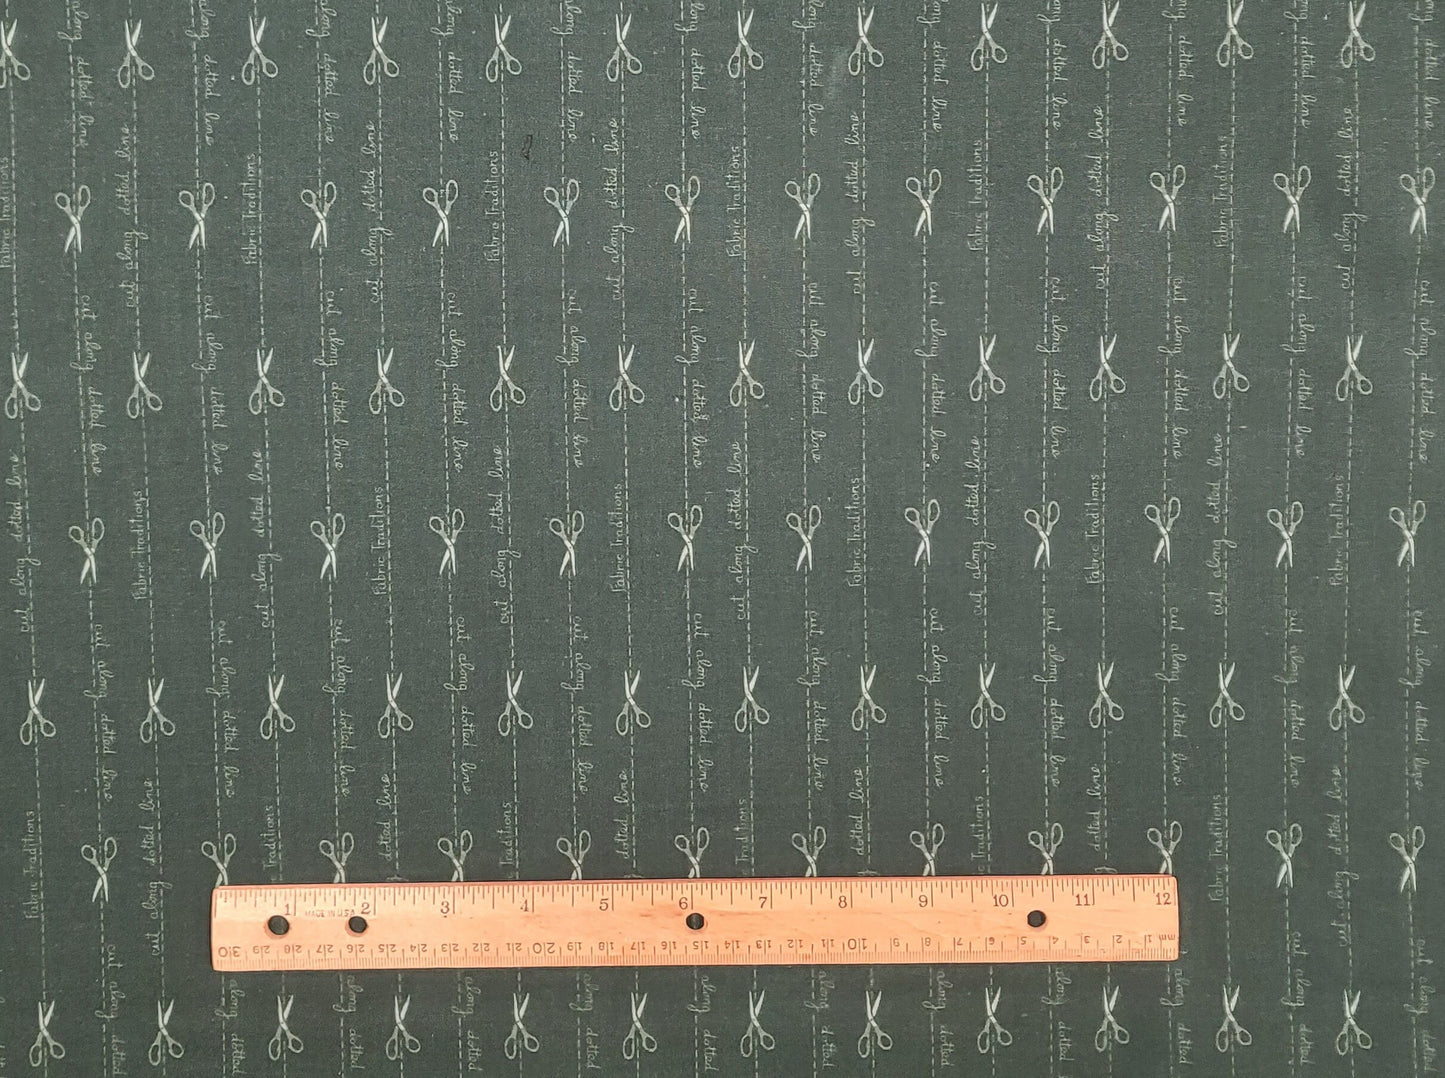 Fabric Traditions 1993 - Dark Green Fabric / Vertical (Parallel with Selvage) Dotted Line and Scissor Print / "Cut Along Dotted Line"